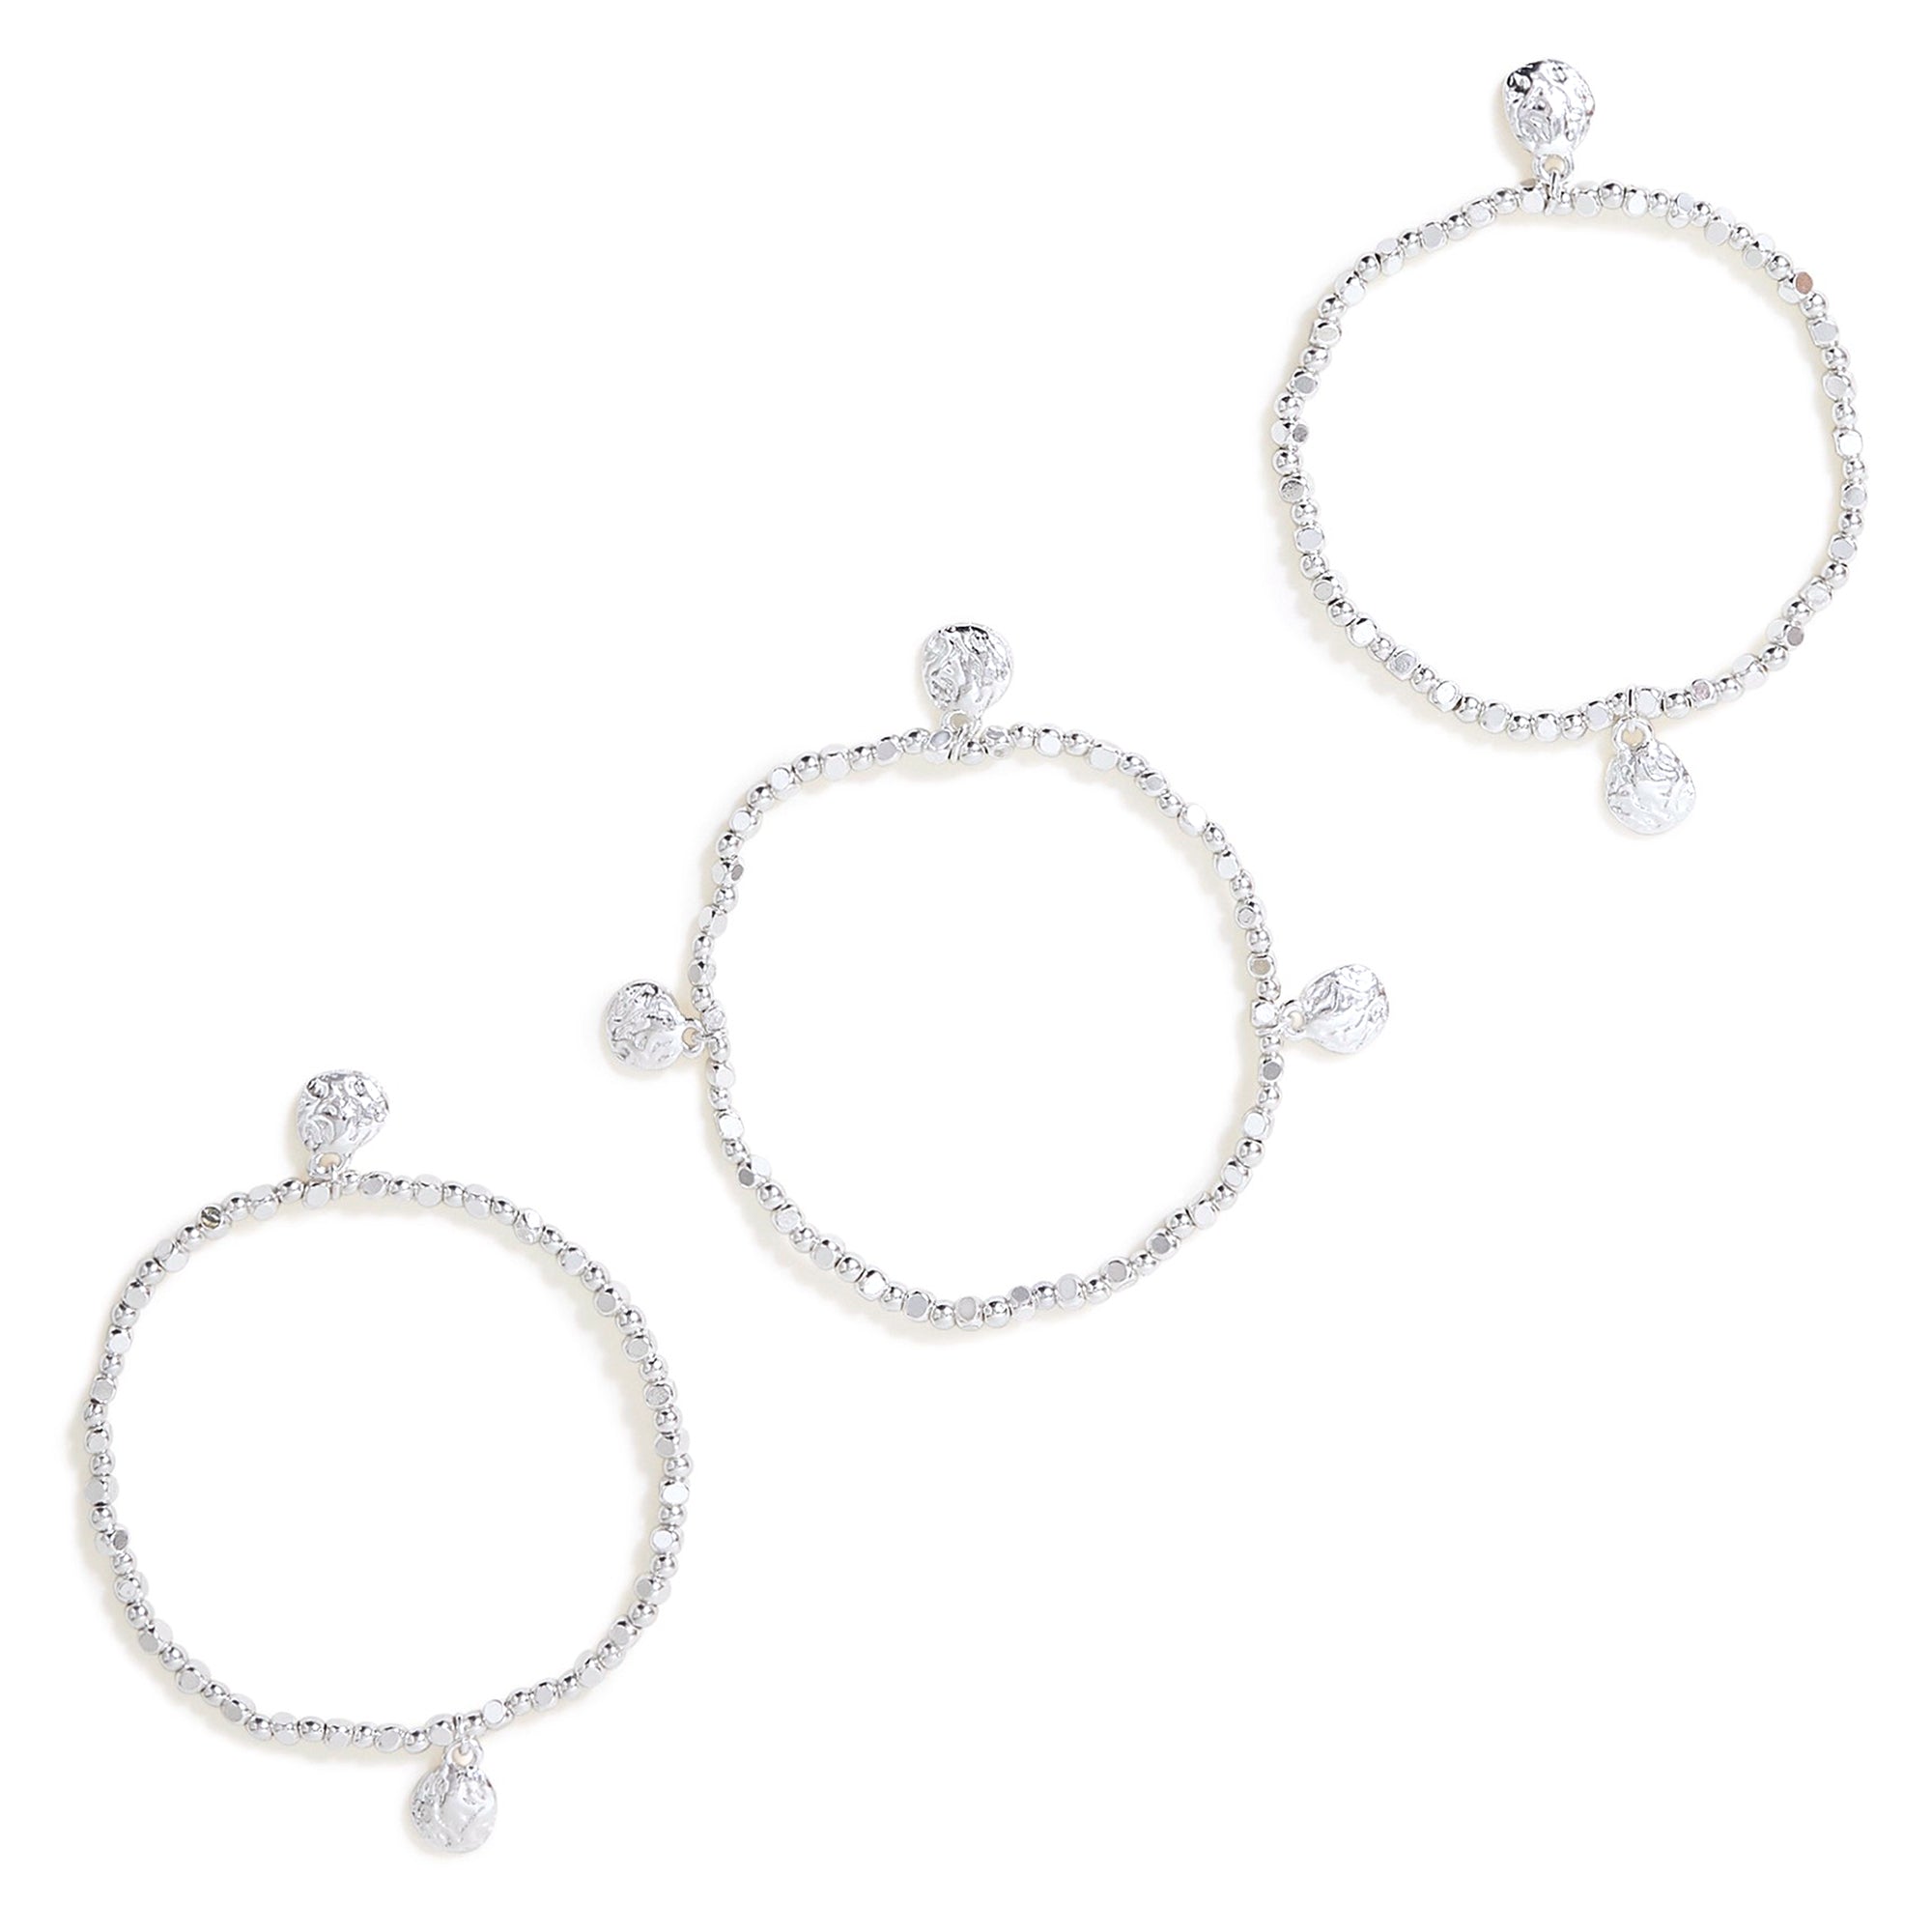 Accessorize London Women's Silver Hammered Metal Stretch Bracelet Pack Of 3